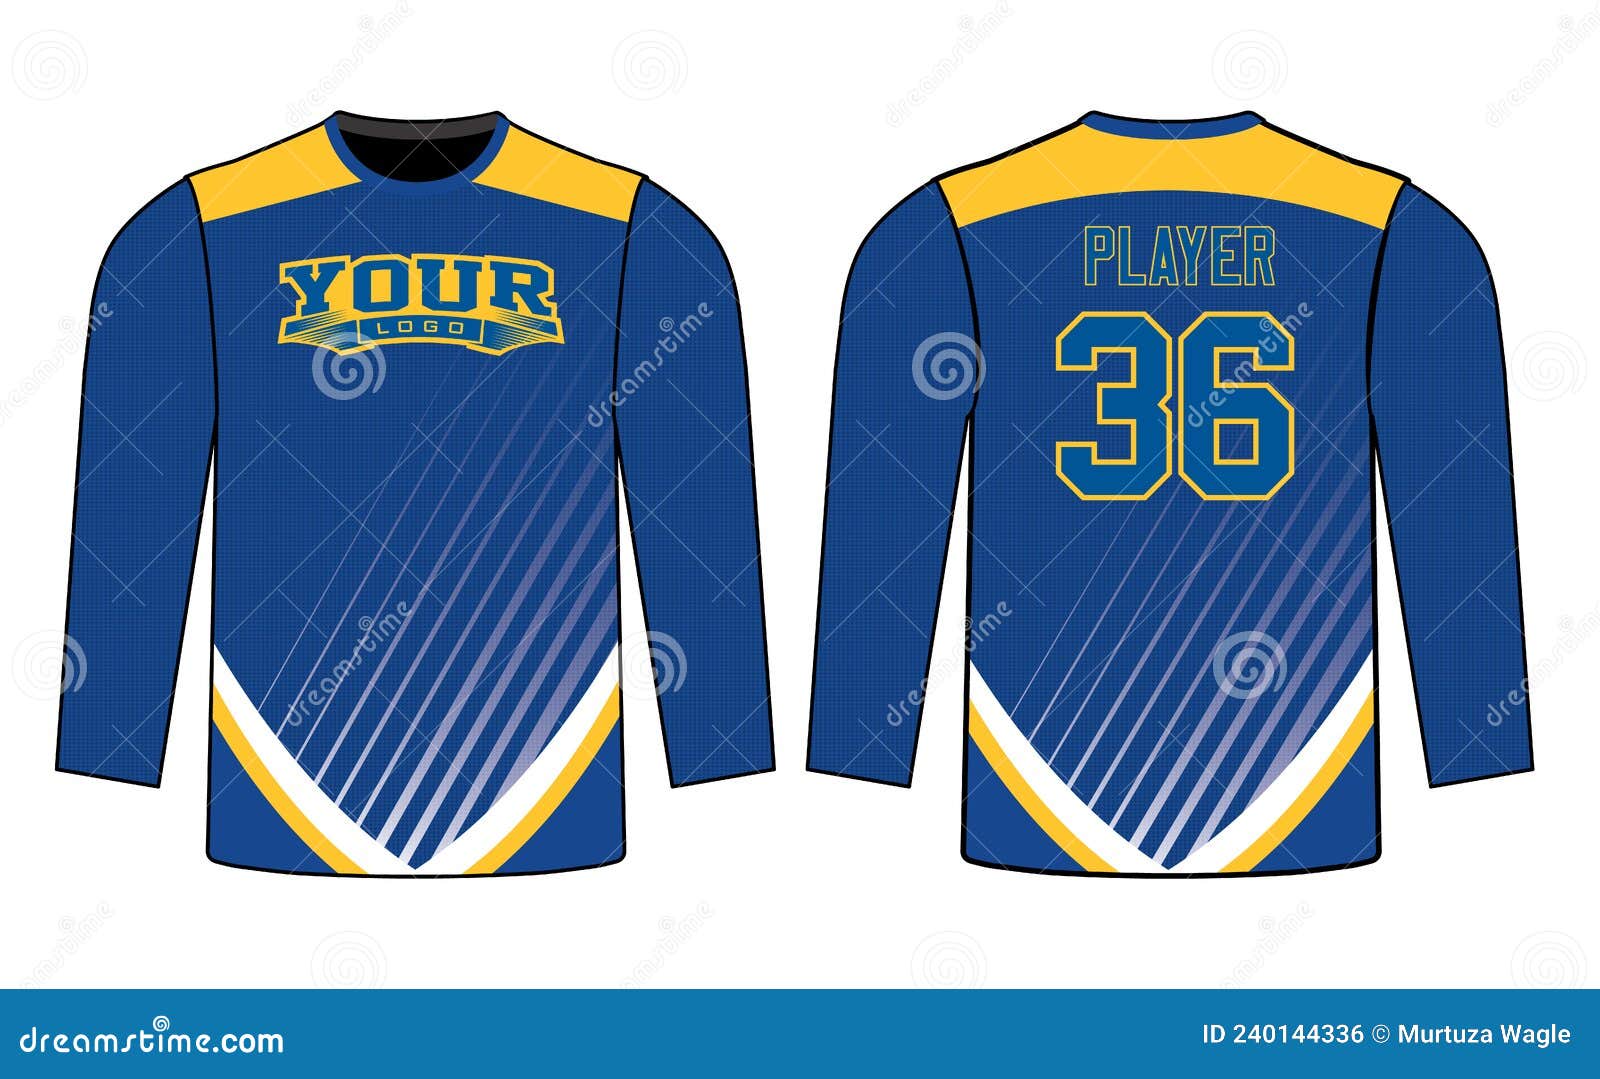 All Sports Team Jersey Design with an Elegant Edgy and Wild Look Stock ...